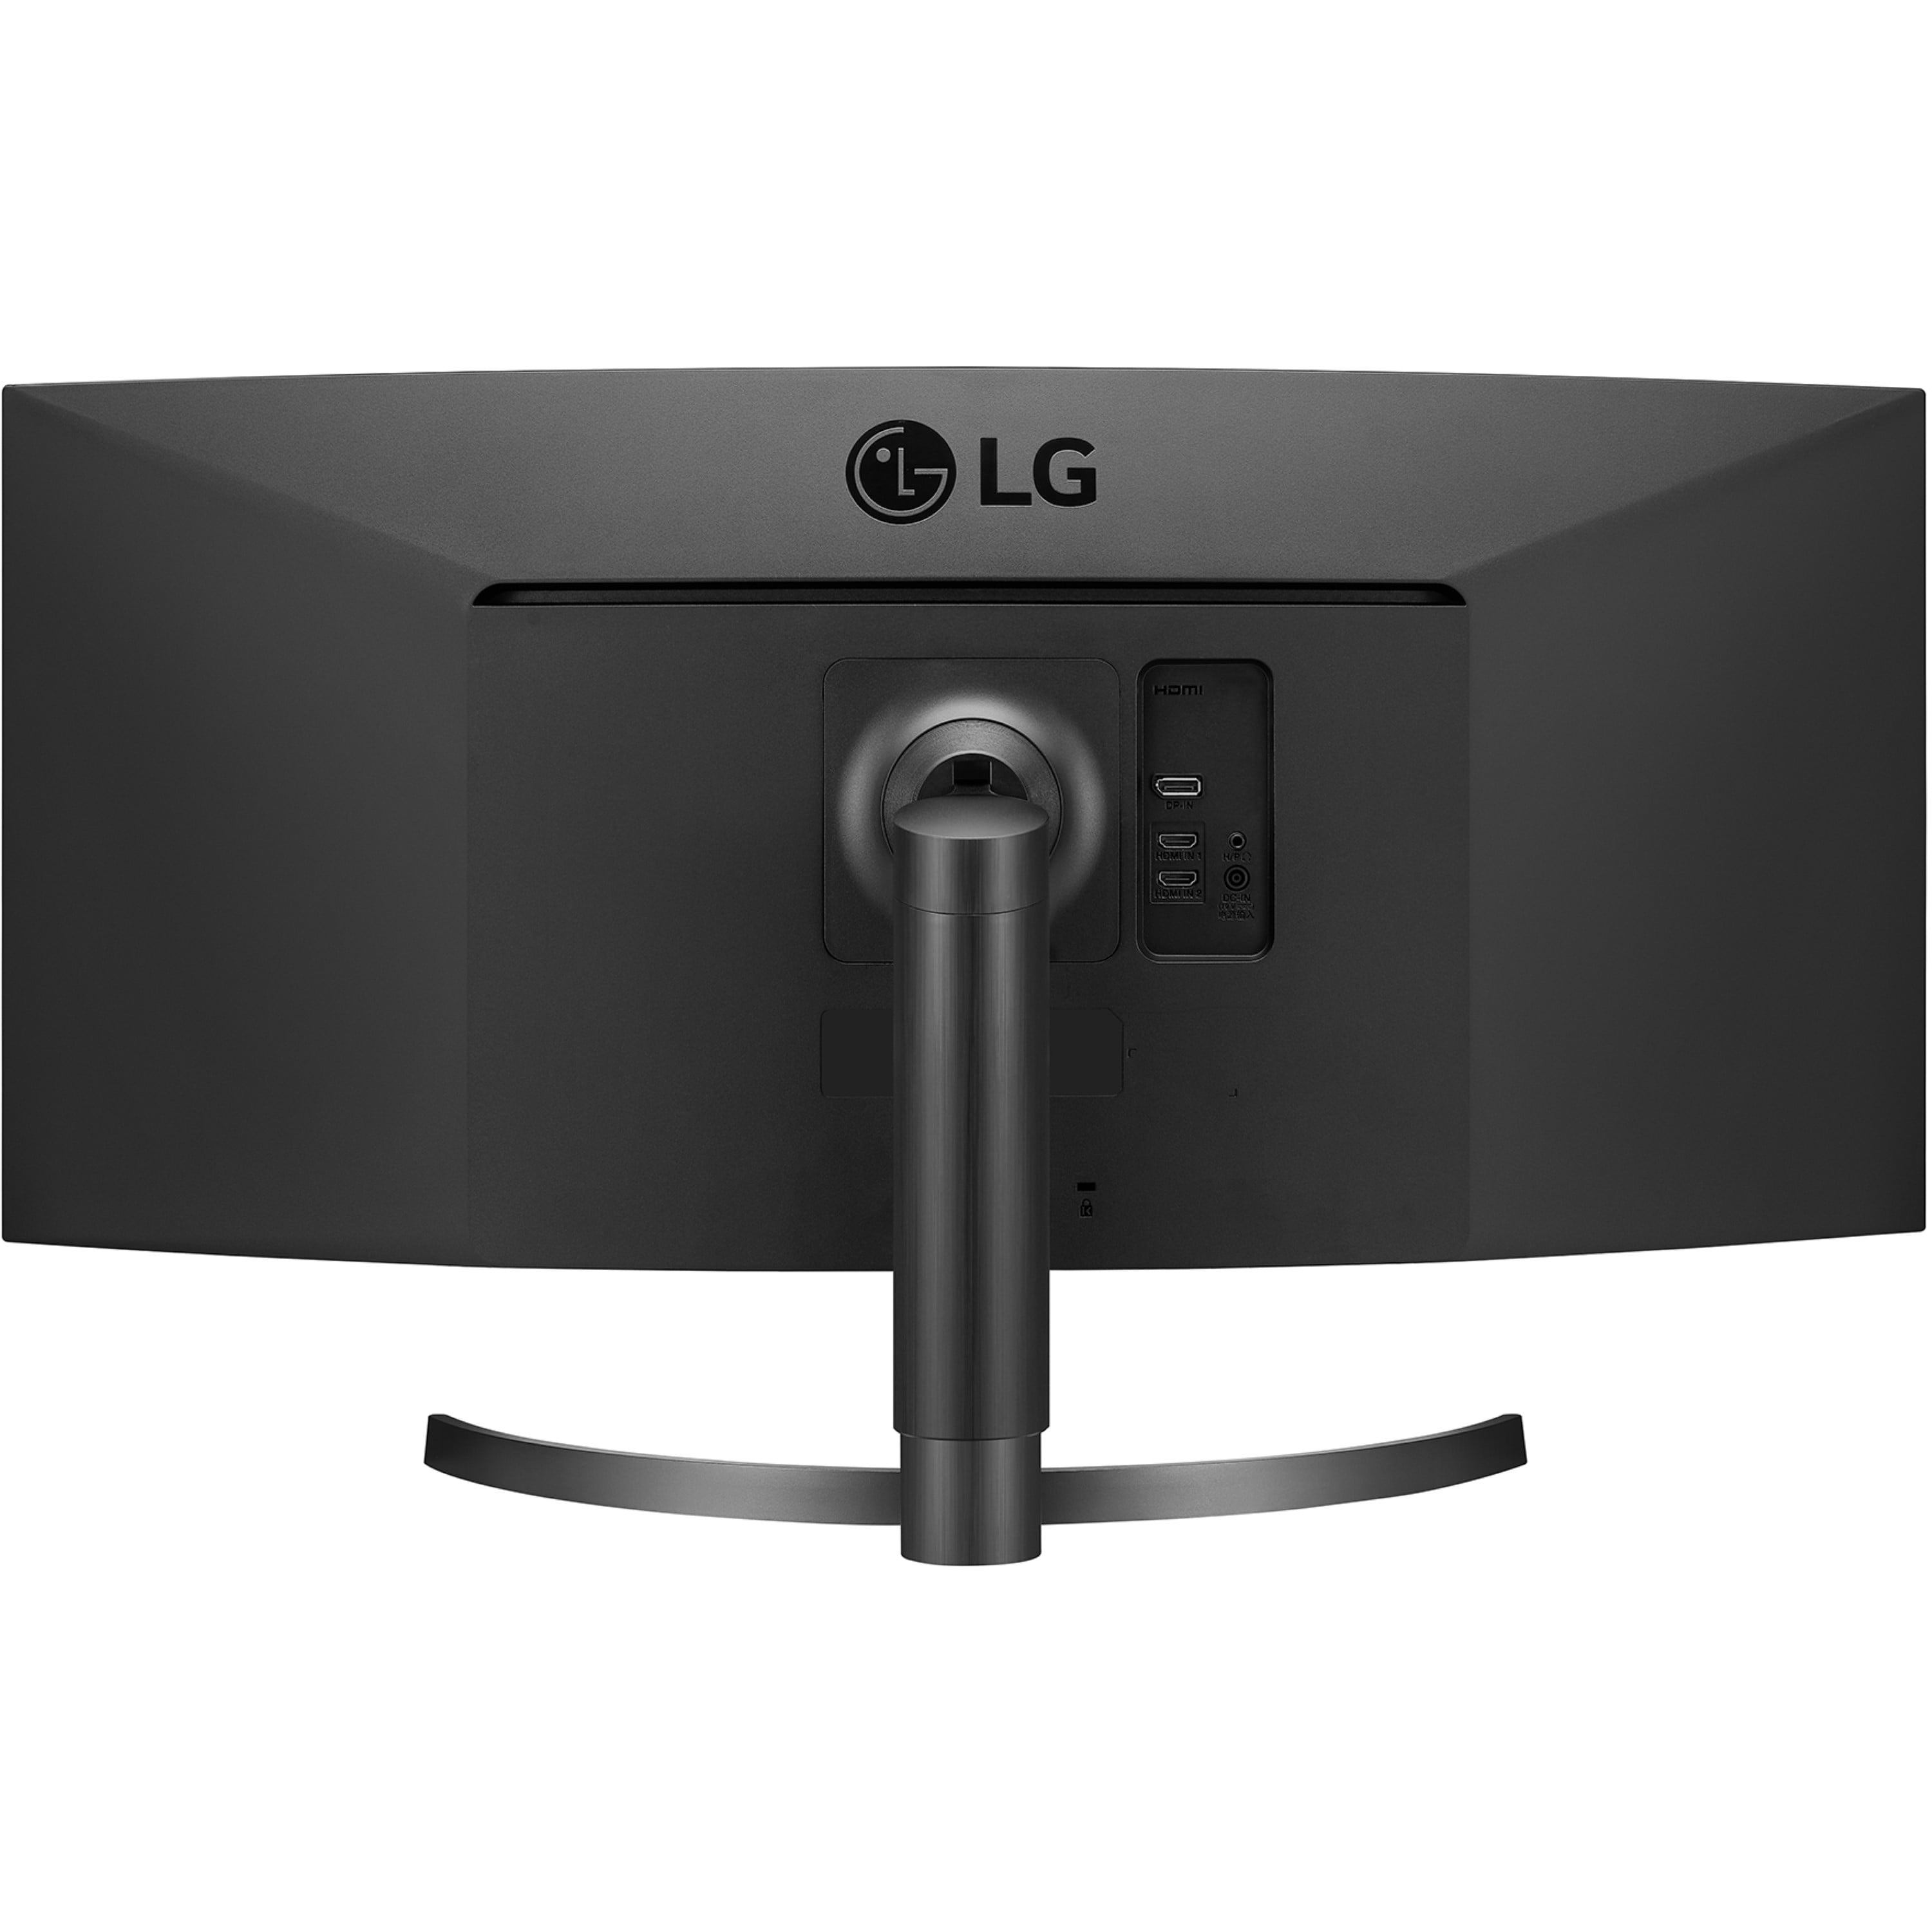 LG 34 Inch 21:9 UltraWide 1080p Full HD Curved IPS Monitor with